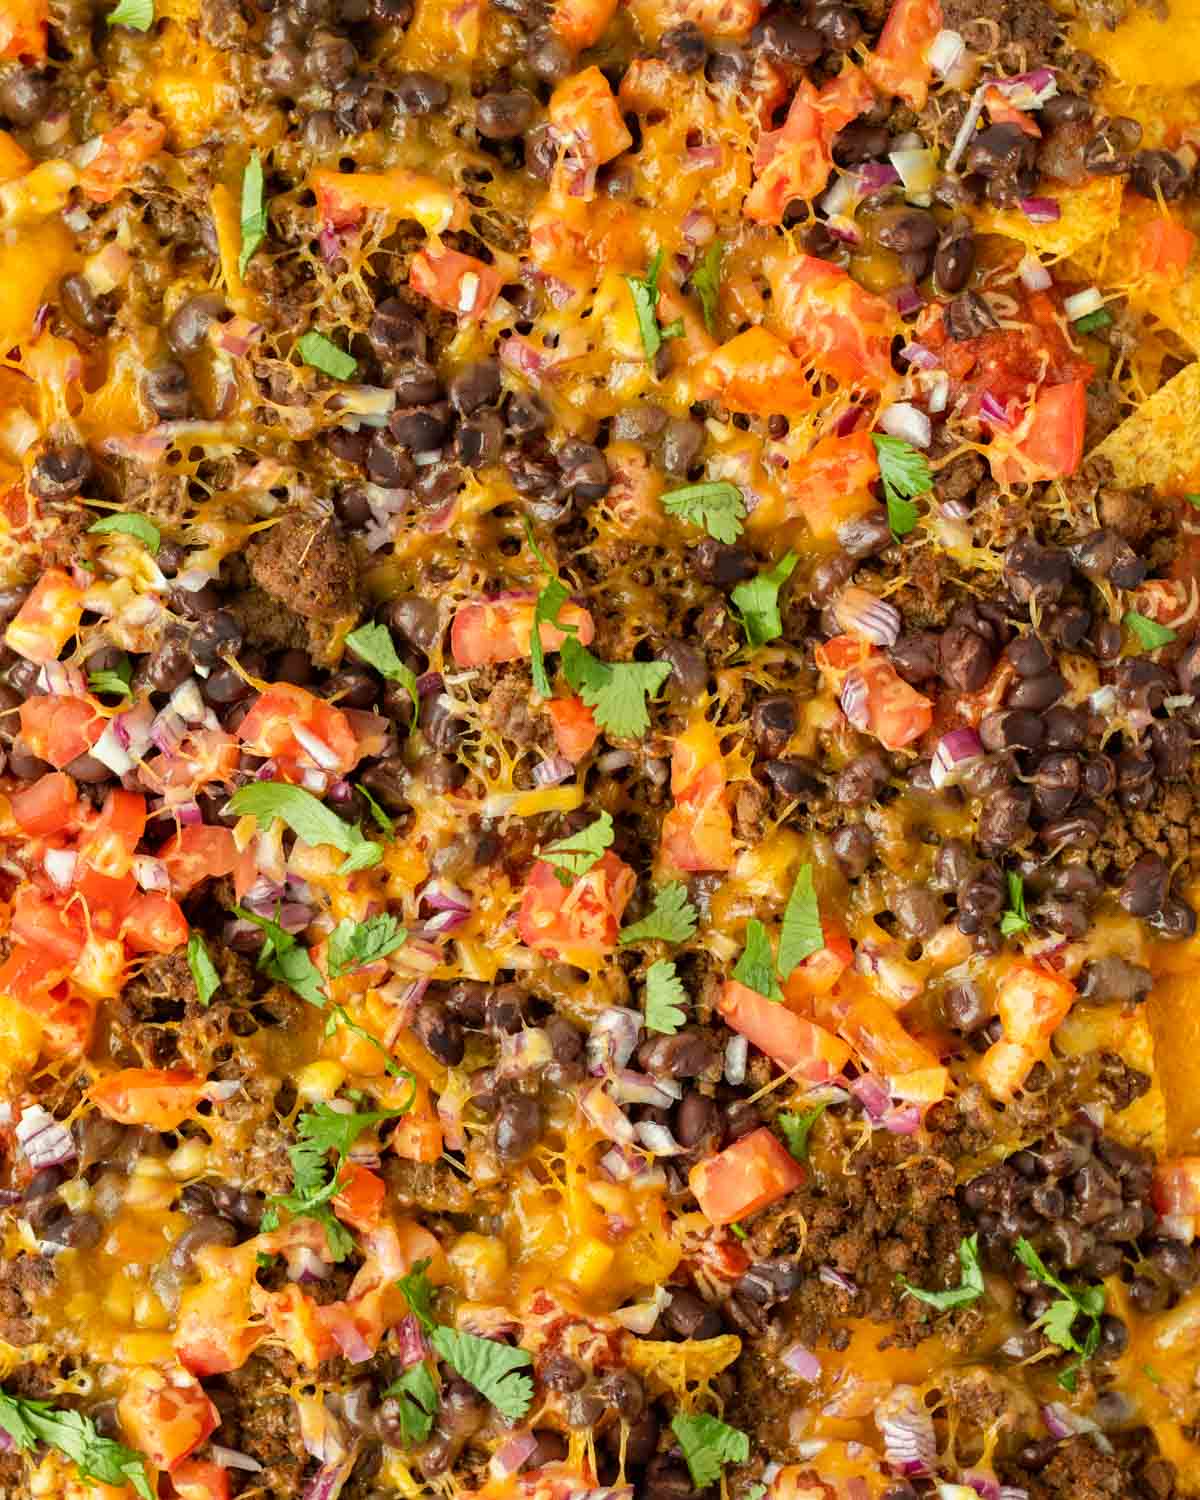 These sheet pan nachos are an easy appetizer recipe made with pantry-staple ingredients for a quick and flavorful crowd-pleaser dish. This recipe can be served for a game day appetizer but is also a great quick weeknight meal.